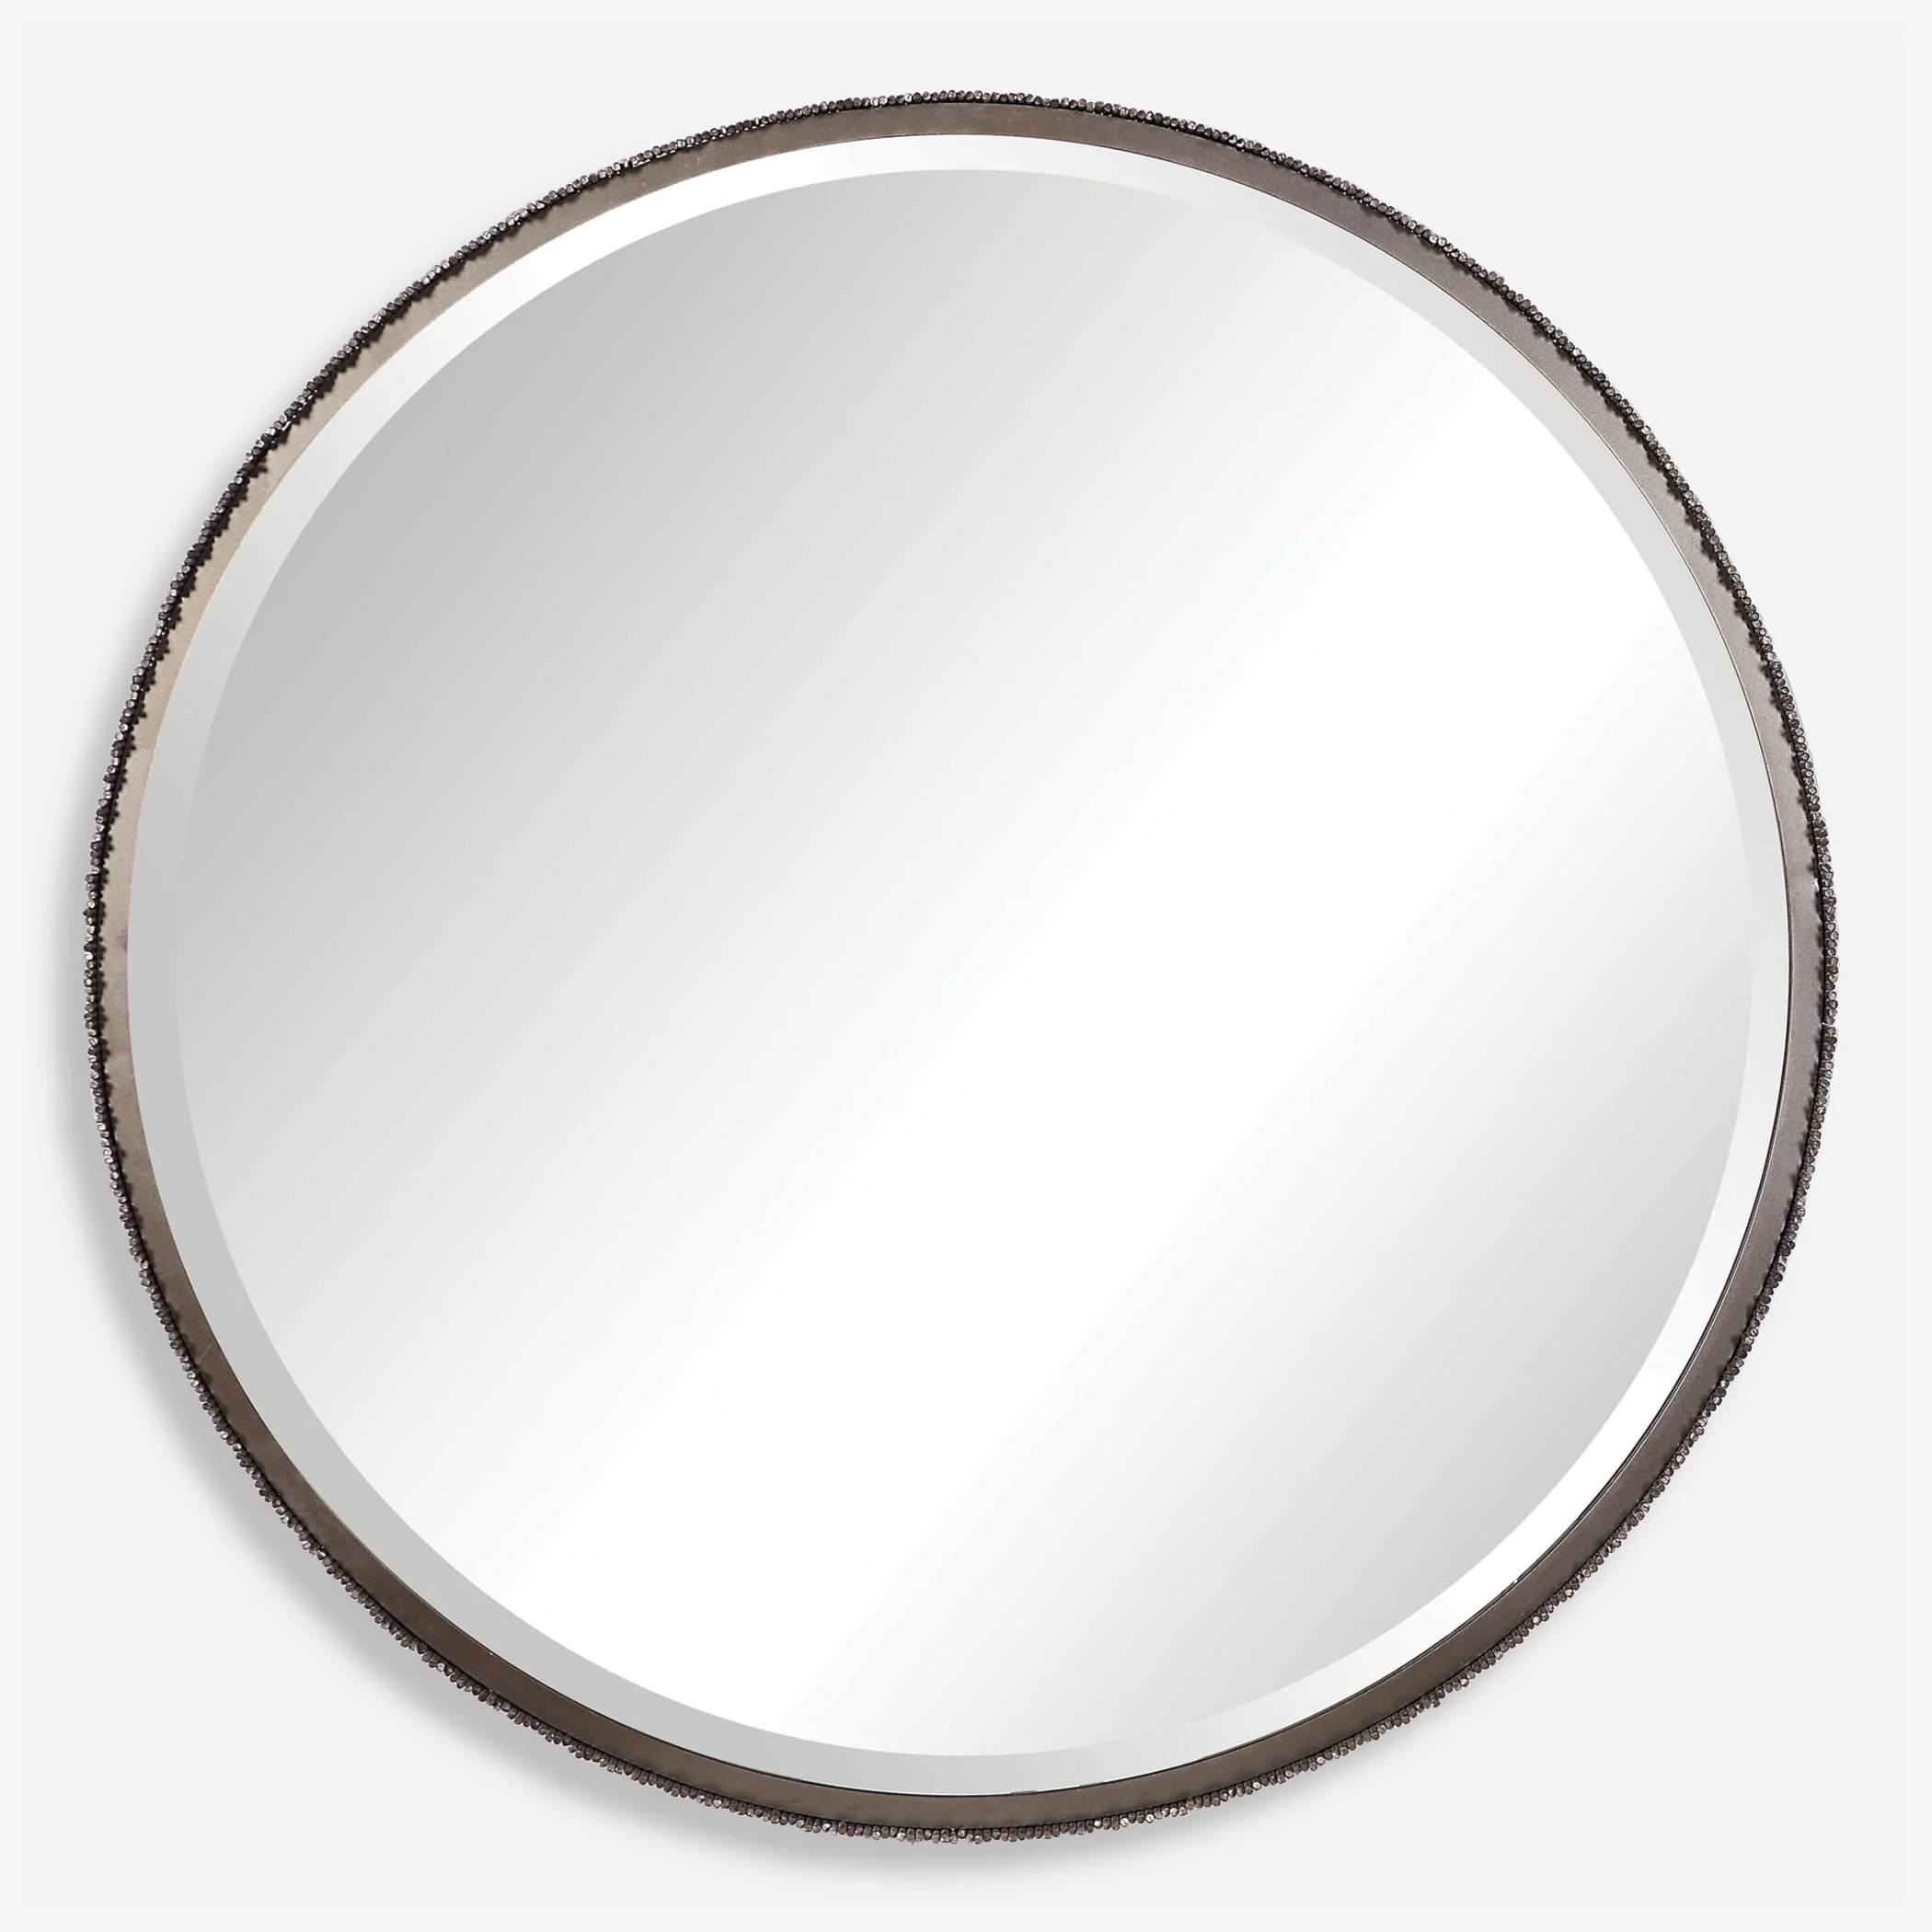 Sailor's Knot Sailor's Knot White Small Round Mirror